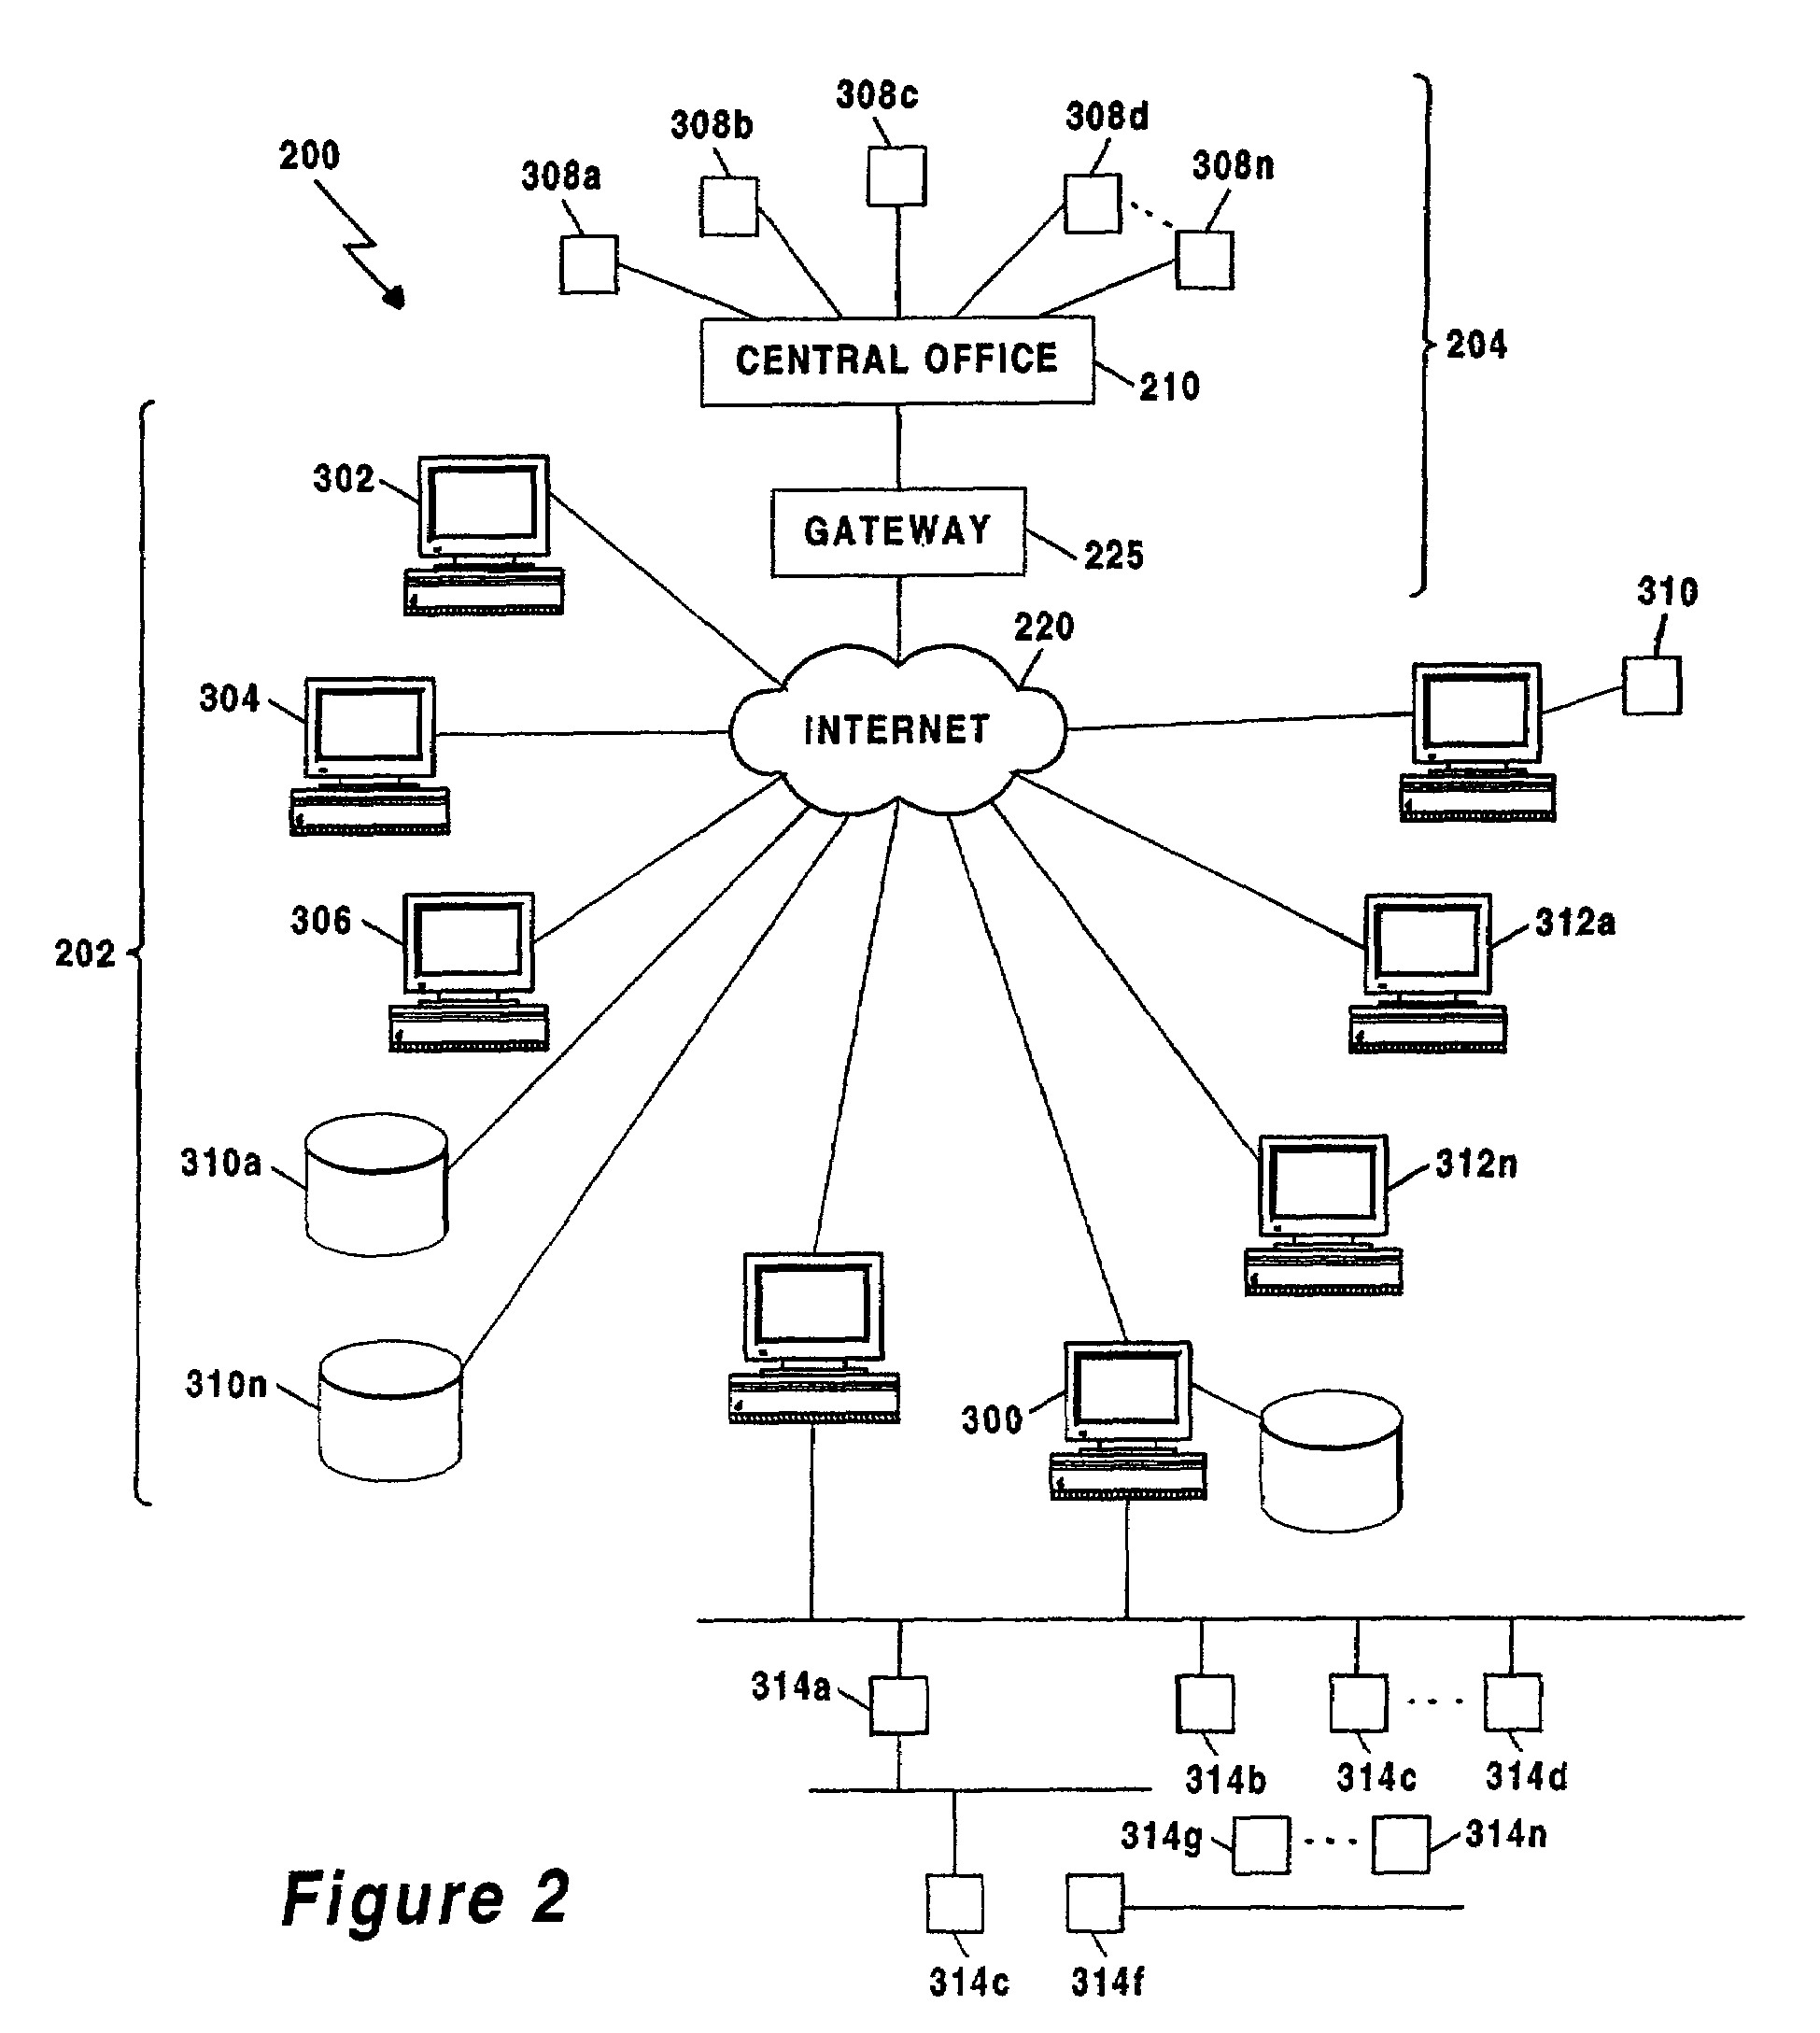 Method and apparatus for maintaining the status of objects in computer networks using virtual state machines